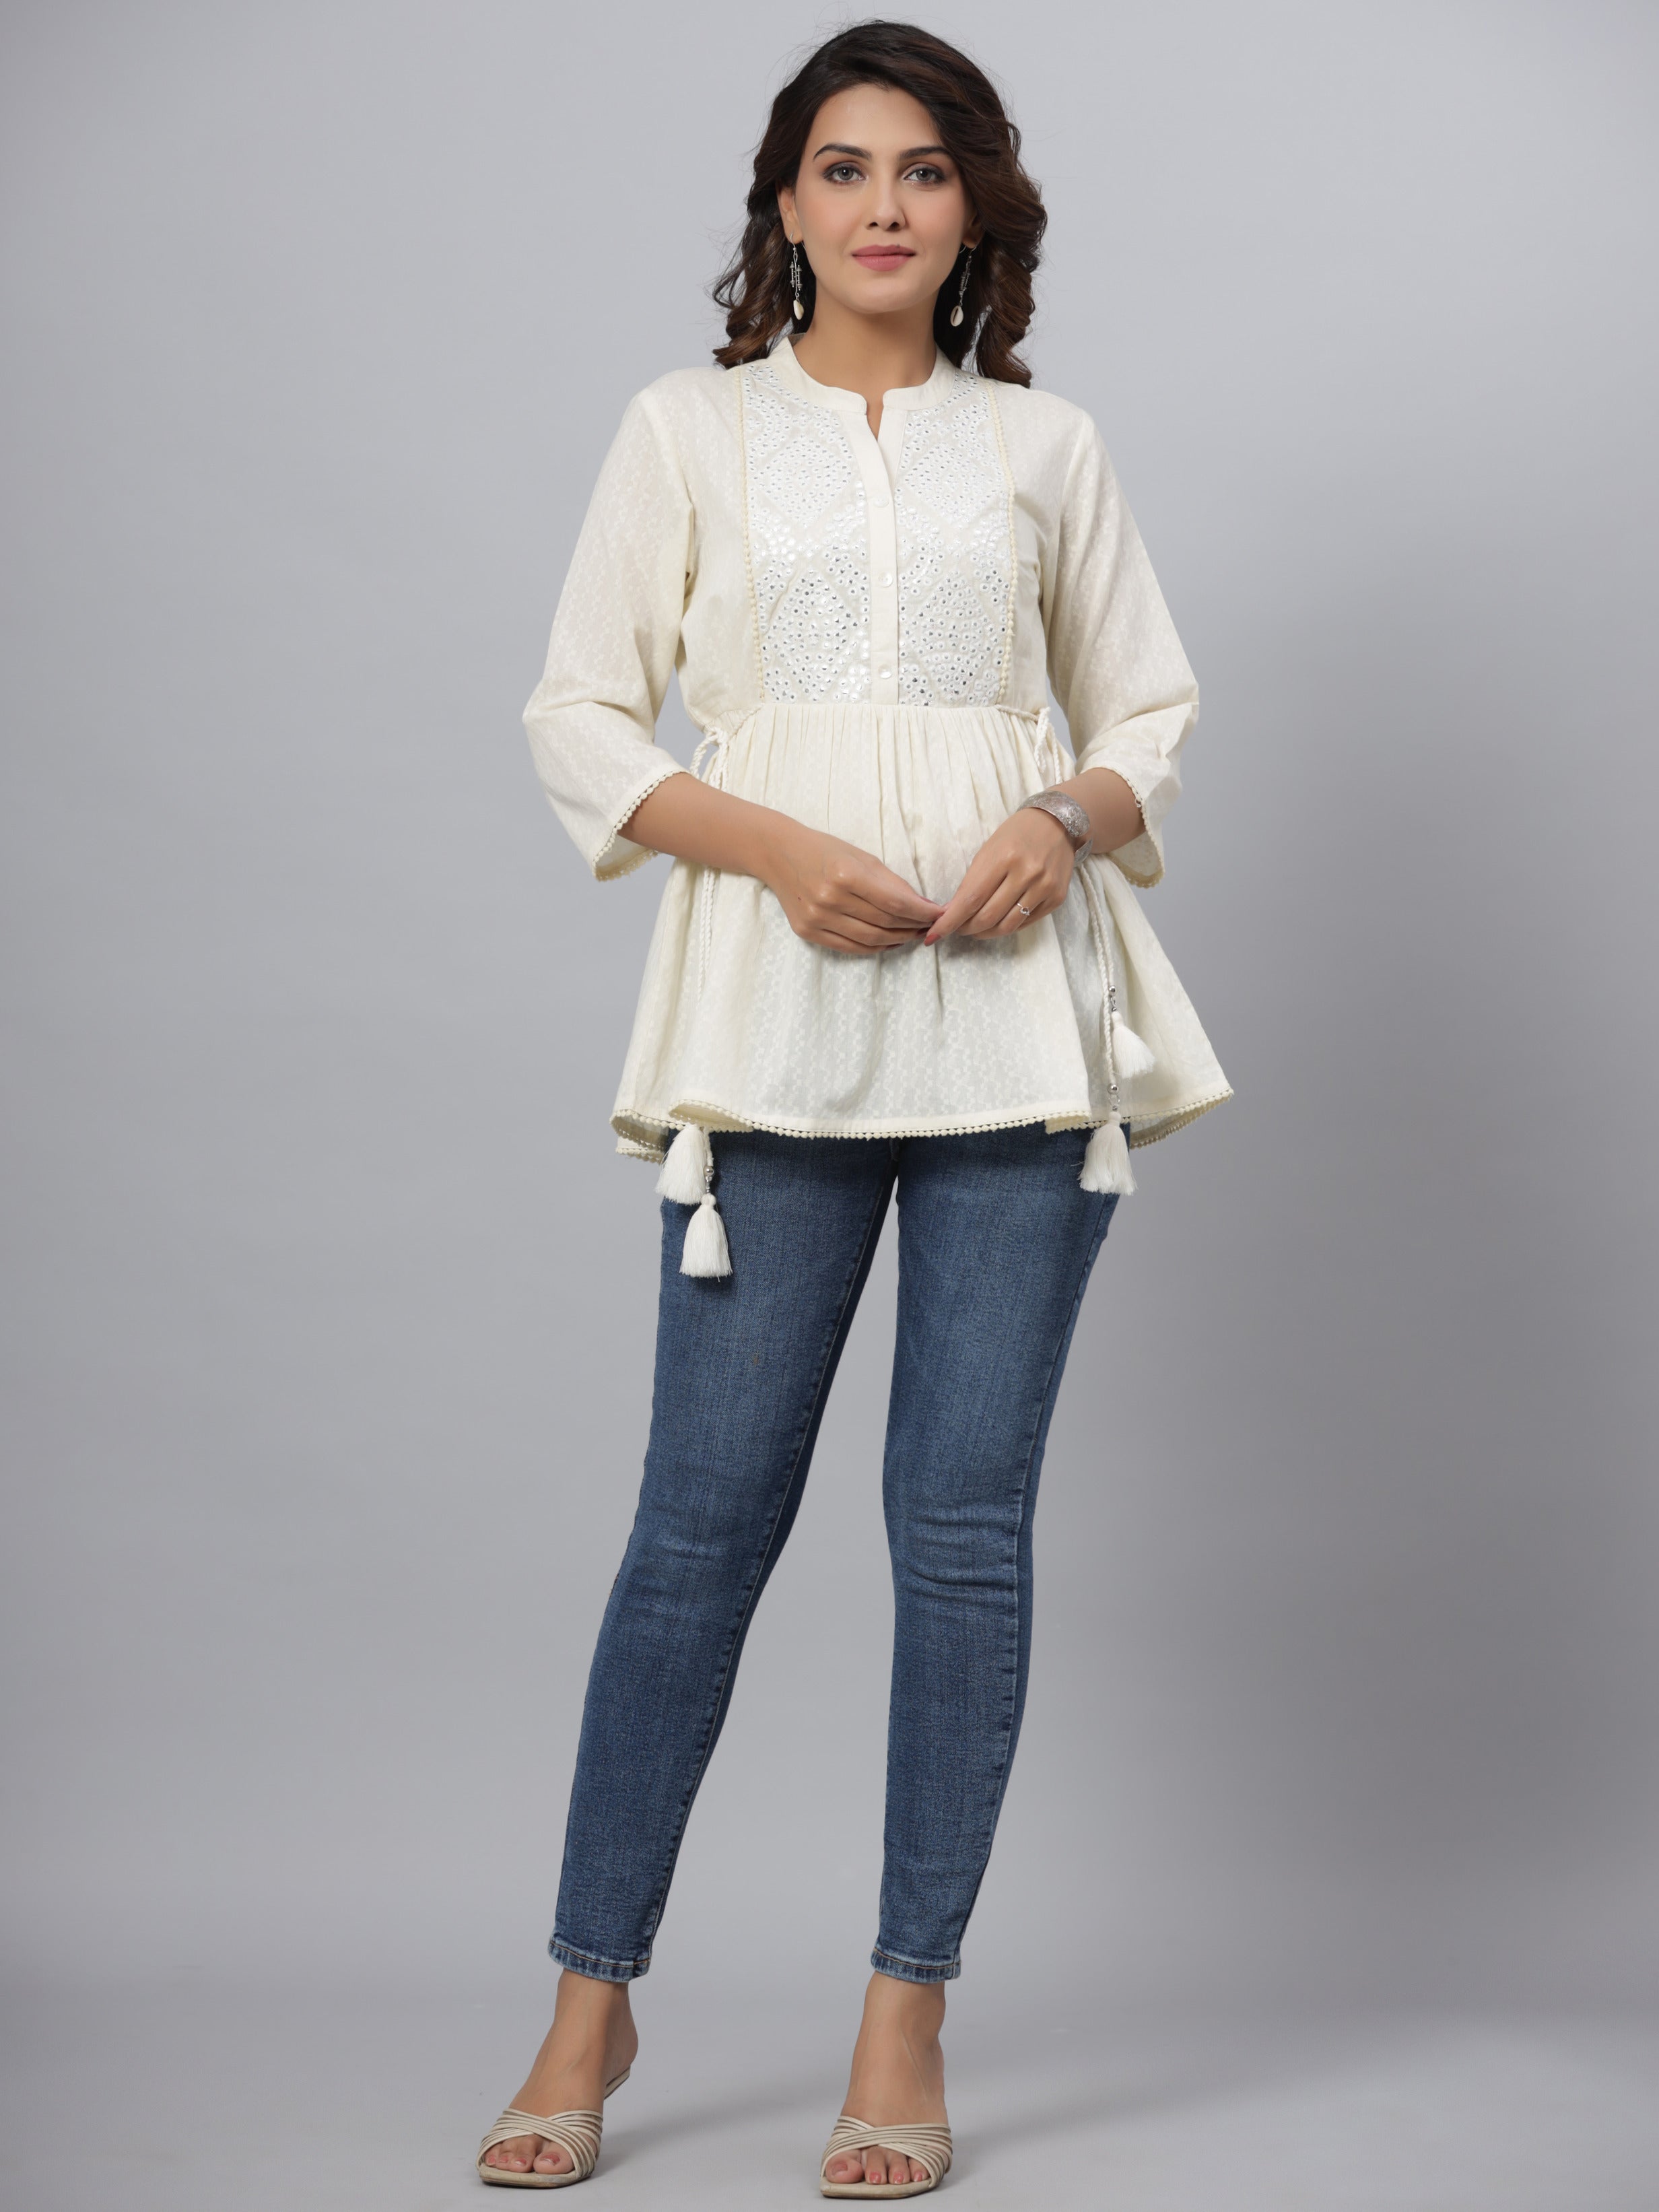 Juniper Women's Offwhite Cotton Dobby Solid With embroidered Straight Tunic